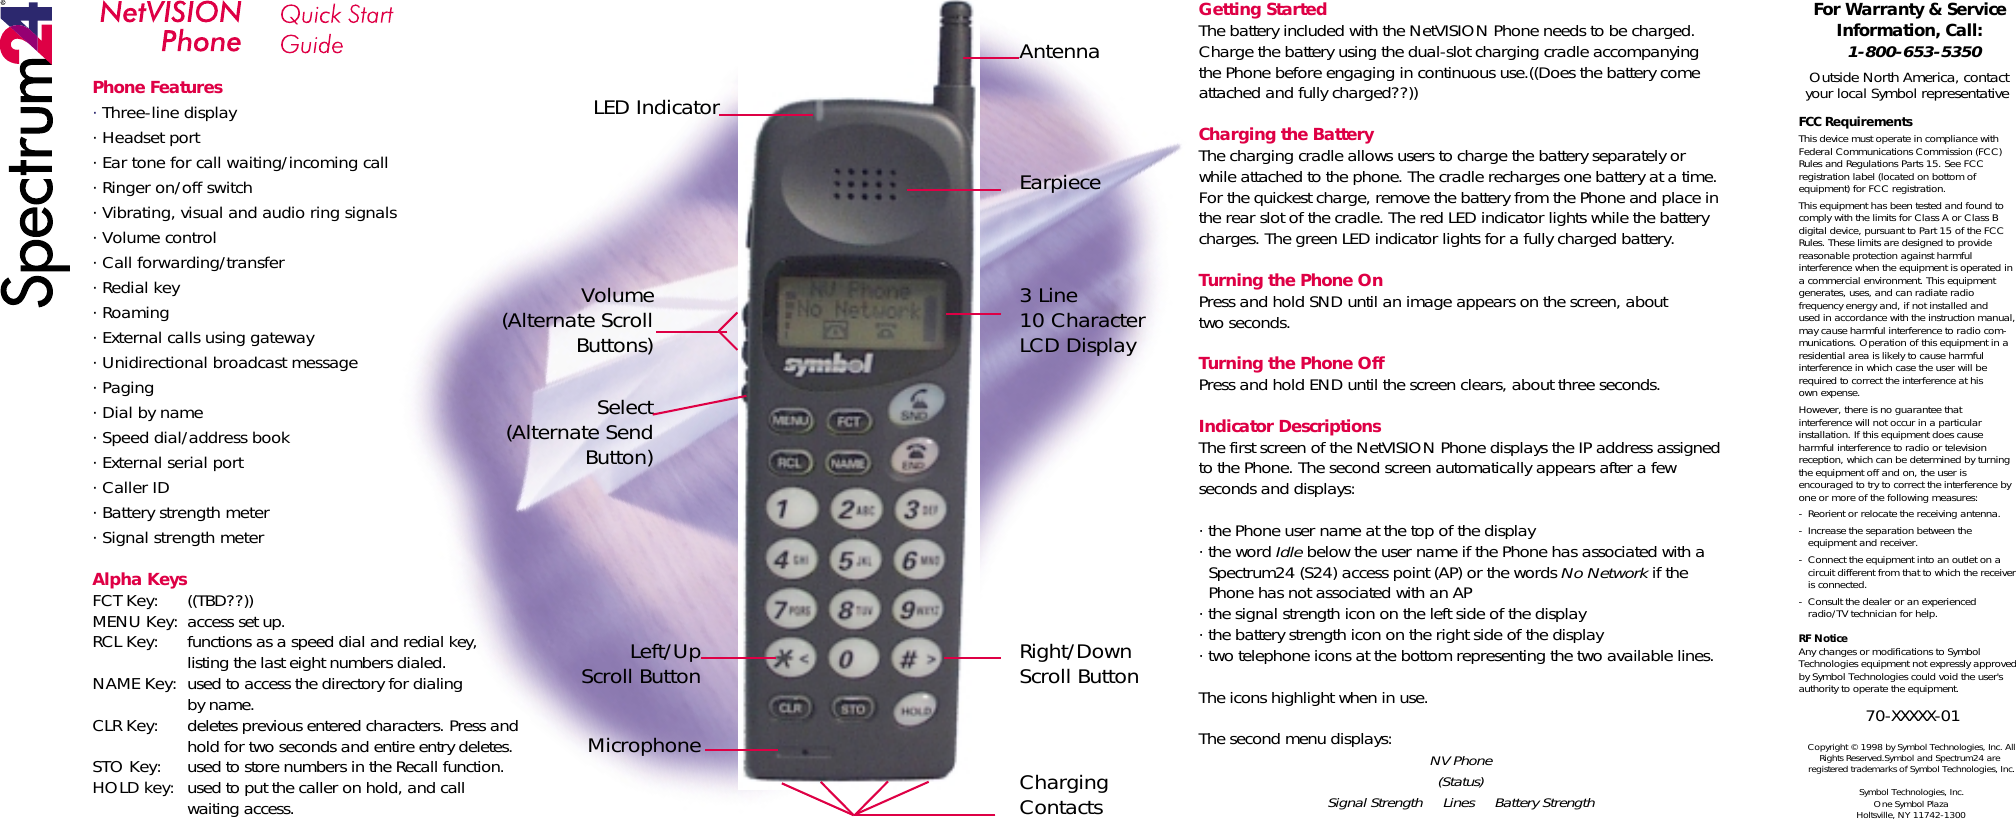 Phone Features· Three-line display· Headset port· Ear tone for call waiting/incoming call· Ringer on/off switch· Vibrating, visual and audio ring signals· Volume control· Call forwarding/transfer· Redial key· Roaming· External calls using gateway· Unidirectional broadcast message· Paging· Dial by name· Speed dial/address book· External serial port· Caller ID· Battery strength meter· Signal strength meterAlpha KeysFCT Key:  ((TBD??))MENU Key:  access set up.RCL Key:  functions as a speed dial and redial key,  listing the last eight numbers dialed.NAME Key:  used to access the directory for dialing by name.CLR Key:  deletes previous entered characters. Press and    hold for two seconds and entire entry deletes.STO Key:  used to store numbers in the Recall function.HOLD key:  used to put the caller on hold, and call waiting access.Getting StartedThe battery included with the NetVISION Phone needs to be charged. Charge the battery using the dual-slot charging cradle accompanying the Phone before engaging in continuous use.((Does the battery come attached and fully charged??))Charging the BatteryThe charging cradle allows users to charge the battery separately or while attached to the phone. The cradle recharges one battery at a time. For the quickest charge, remove the battery from the Phone and place in the rear slot of the cradle. The red LED indicator lights while the battery charges. The green LED indicator lights for a fully charged battery. Turning the Phone OnPress and hold SND until an image appears on the screen, abouttwo seconds.Turning the Phone OffPress and hold END until the screen clears, about three seconds.Indicator DescriptionsThe first screen of the NetVISION Phone displays the IP address assigned to the Phone. The second screen automatically appears after a few seconds and displays:· the Phone user name at the top of the display· the word Idle below the user name if the Phone has associated with a      Spectrum24 (S24) access point (AP) or the words No Network if the      Phone has not associated with an AP· the signal strength icon on the left side of the display· the battery strength icon on the right side of the display· two telephone icons at the bottom representing the two available lines. The icons highlight when in use.The second menu displays: NV Phone(Status)Signal Strength     Lines     Battery StrengthFor Warranty &amp; Service Information, Call:1-800-653-5350Outside North America, contact your local Symbol representativeFCC RequirementsThis device must operate in compliance with Federal Communications Commission (FCC) Rules and Regulations Parts 15. See FCC registration label (located on bottom of equipment) for FCC registration.This equipment has been tested and found to comply with the limits for Class A or Class B digital device, pursuant to Part 15 of the FCC Rules. These limits are designed to provide reasonable protection against harmful interference when the equipment is operated in a commercial environment. This equipment generates, uses, and can radiate radio frequency energy and, if not installed andused in accordance with the instruction manual, may cause harmful interference to radio com-munications. Operation of this equipment in a residential area is likely to cause harmful interference in which case the user will be required to correct the interference at hisown expense.However, there is no guarantee that interference will not occur in a particular installation. If this equipment does cause harmful interference to radio or television reception, which can be determined by turning the equipment off and on, the user is encouraged to try to correct the interference by one or more of the following measures:-  Reorient or relocate the receiving antenna.-  Increase the separation between the    equipment and receiver.-  Connect the equipment into an outlet on a    circuit different from that to which the receiver   is connected.-  Consult the dealer or an experienced    radio/TV technician for help.RF NoticeAny changes or modifications to Symbol Technologies equipment not expressly approved by Symbol Technologies could void the user&apos;s authority to operate the equipment.70-XXXXX-01Copyright © 1998 by Symbol Technologies, Inc. All Rights Reserved.Symbol and Spectrum24 are registered trademarks of Symbol Technologies, Inc.Symbol Technologies, Inc.One Symbol PlazaHoltsville, NY 11742-1300AntennaEarpiece3 Line10 CharacterLCD DisplayRight/DownScroll ButtonCharging ContactsLED IndicatorVolume(Alternate Scroll Buttons)Select(Alternate Send Button)Left/UpScroll ButtonMicrophone